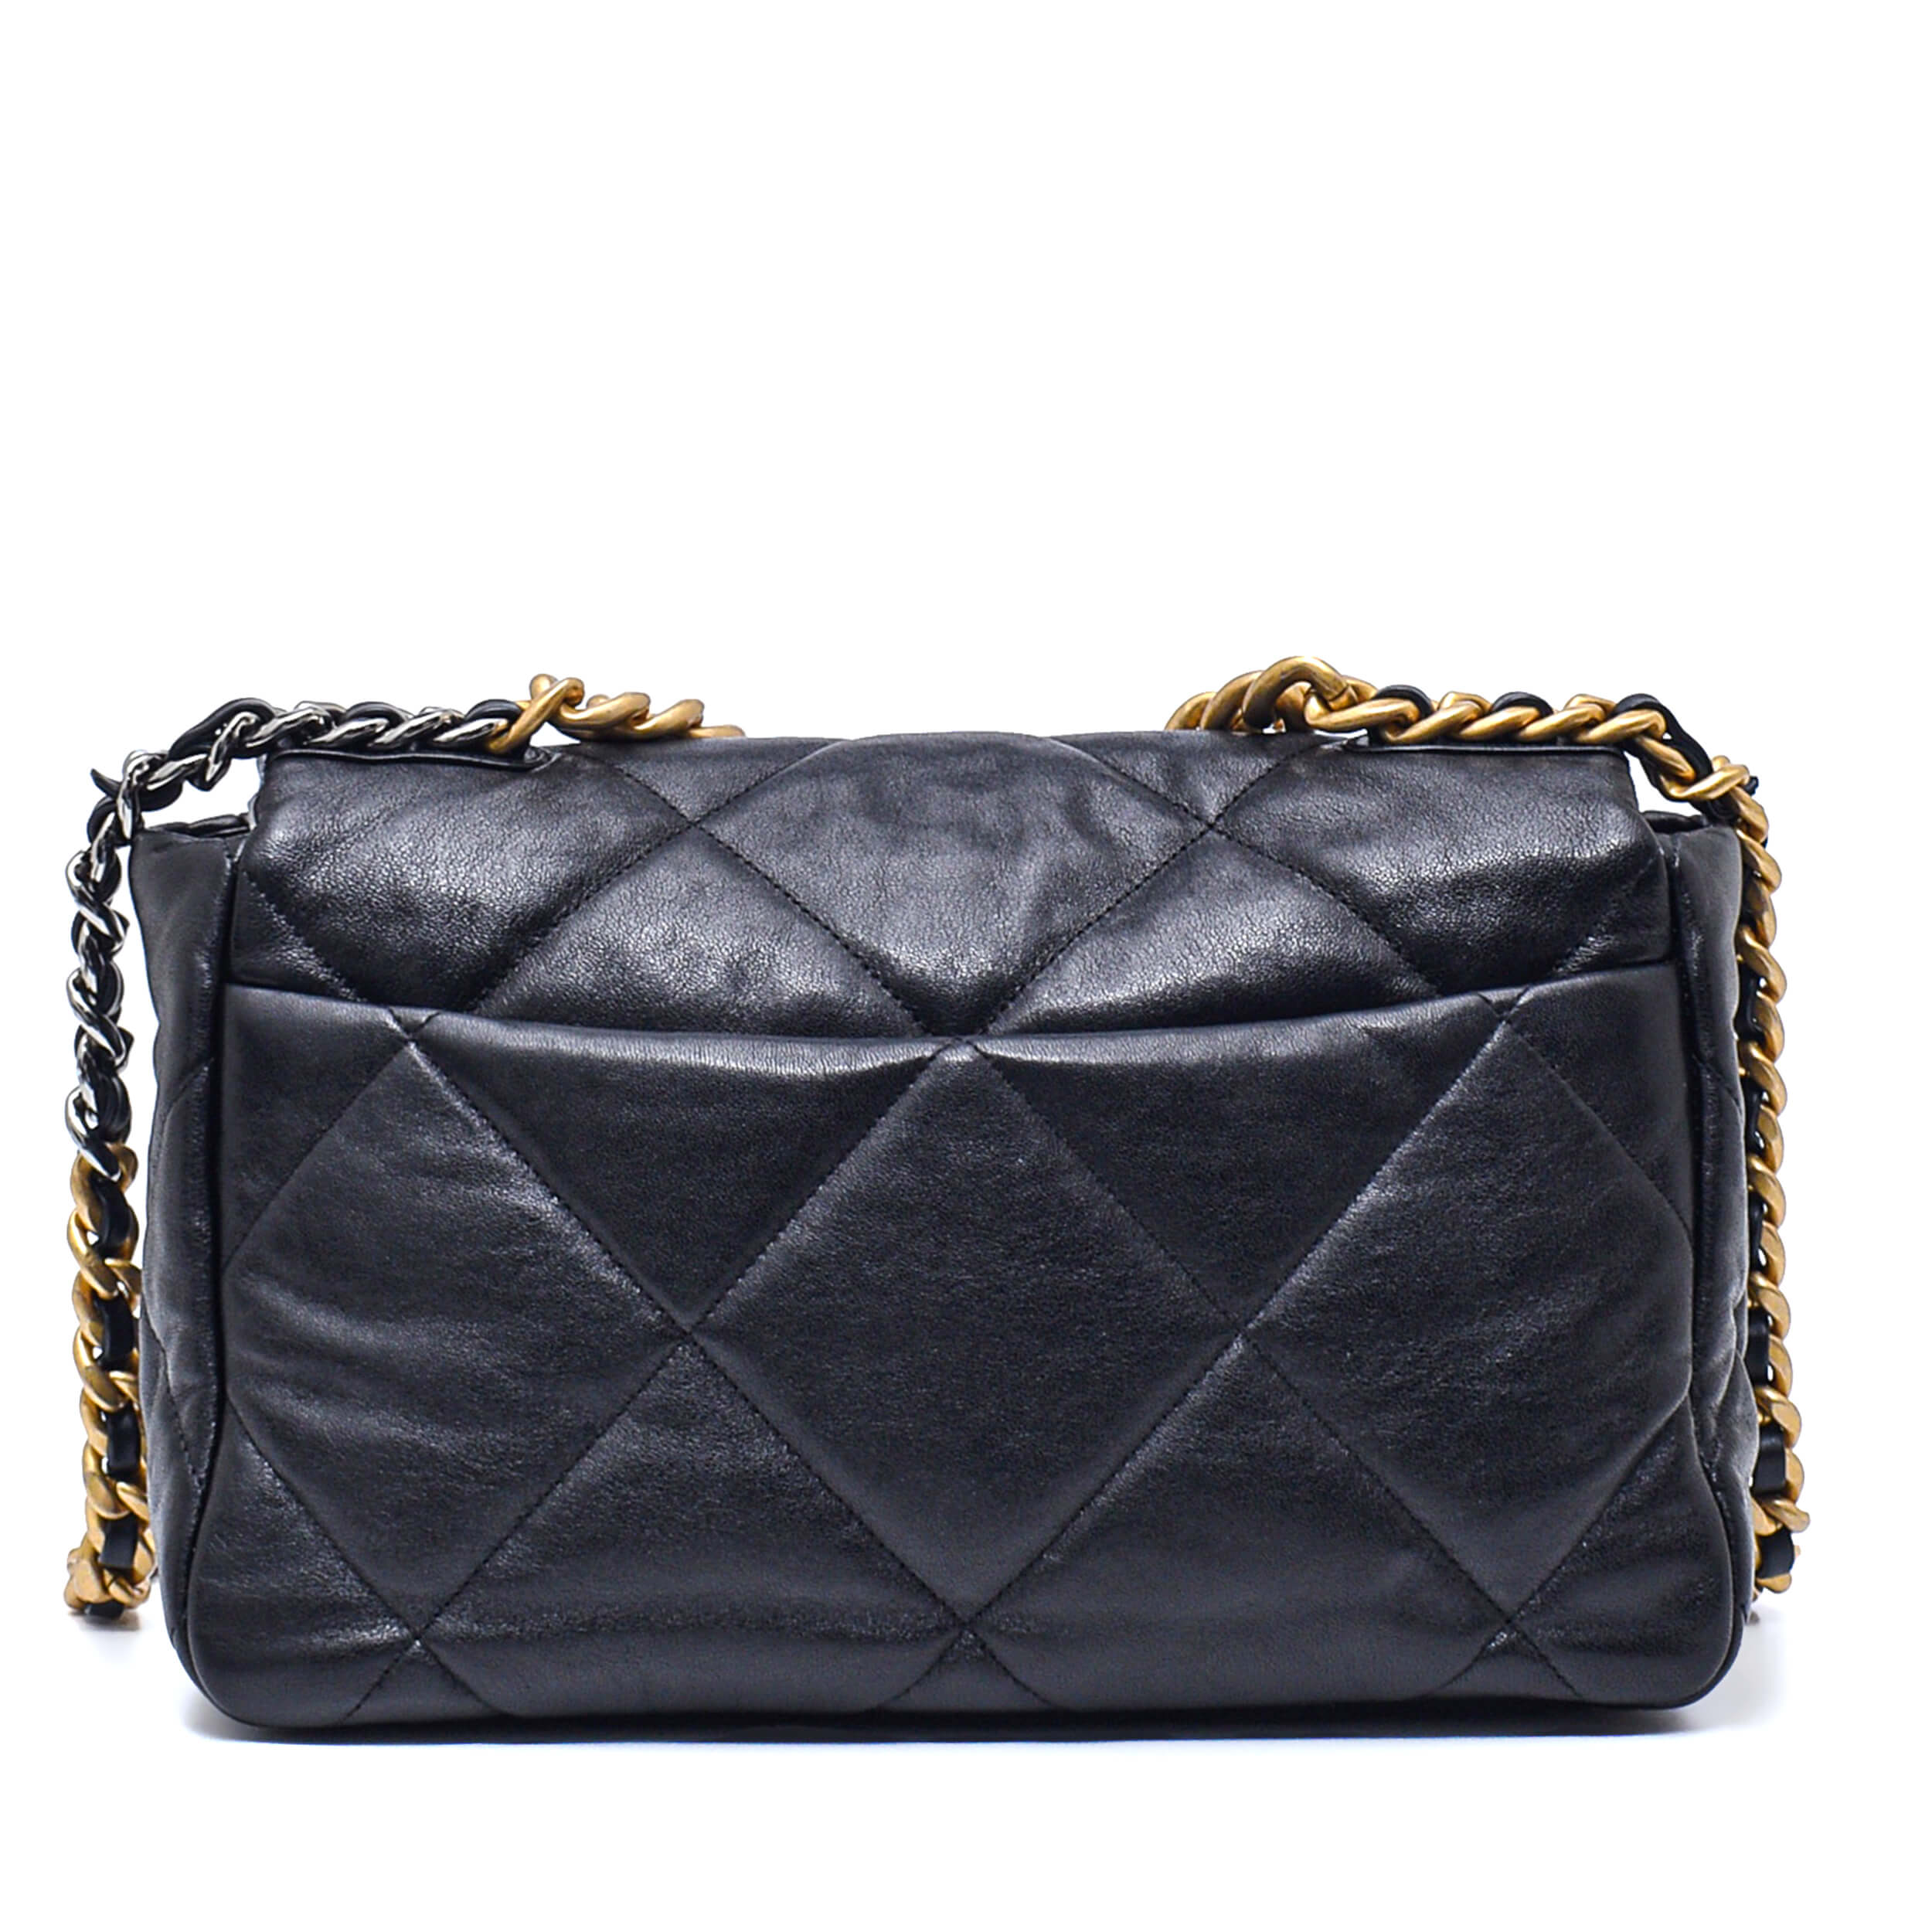 Chanel - Black Quilted Lambskin Shiny Leather No19 Large Bag